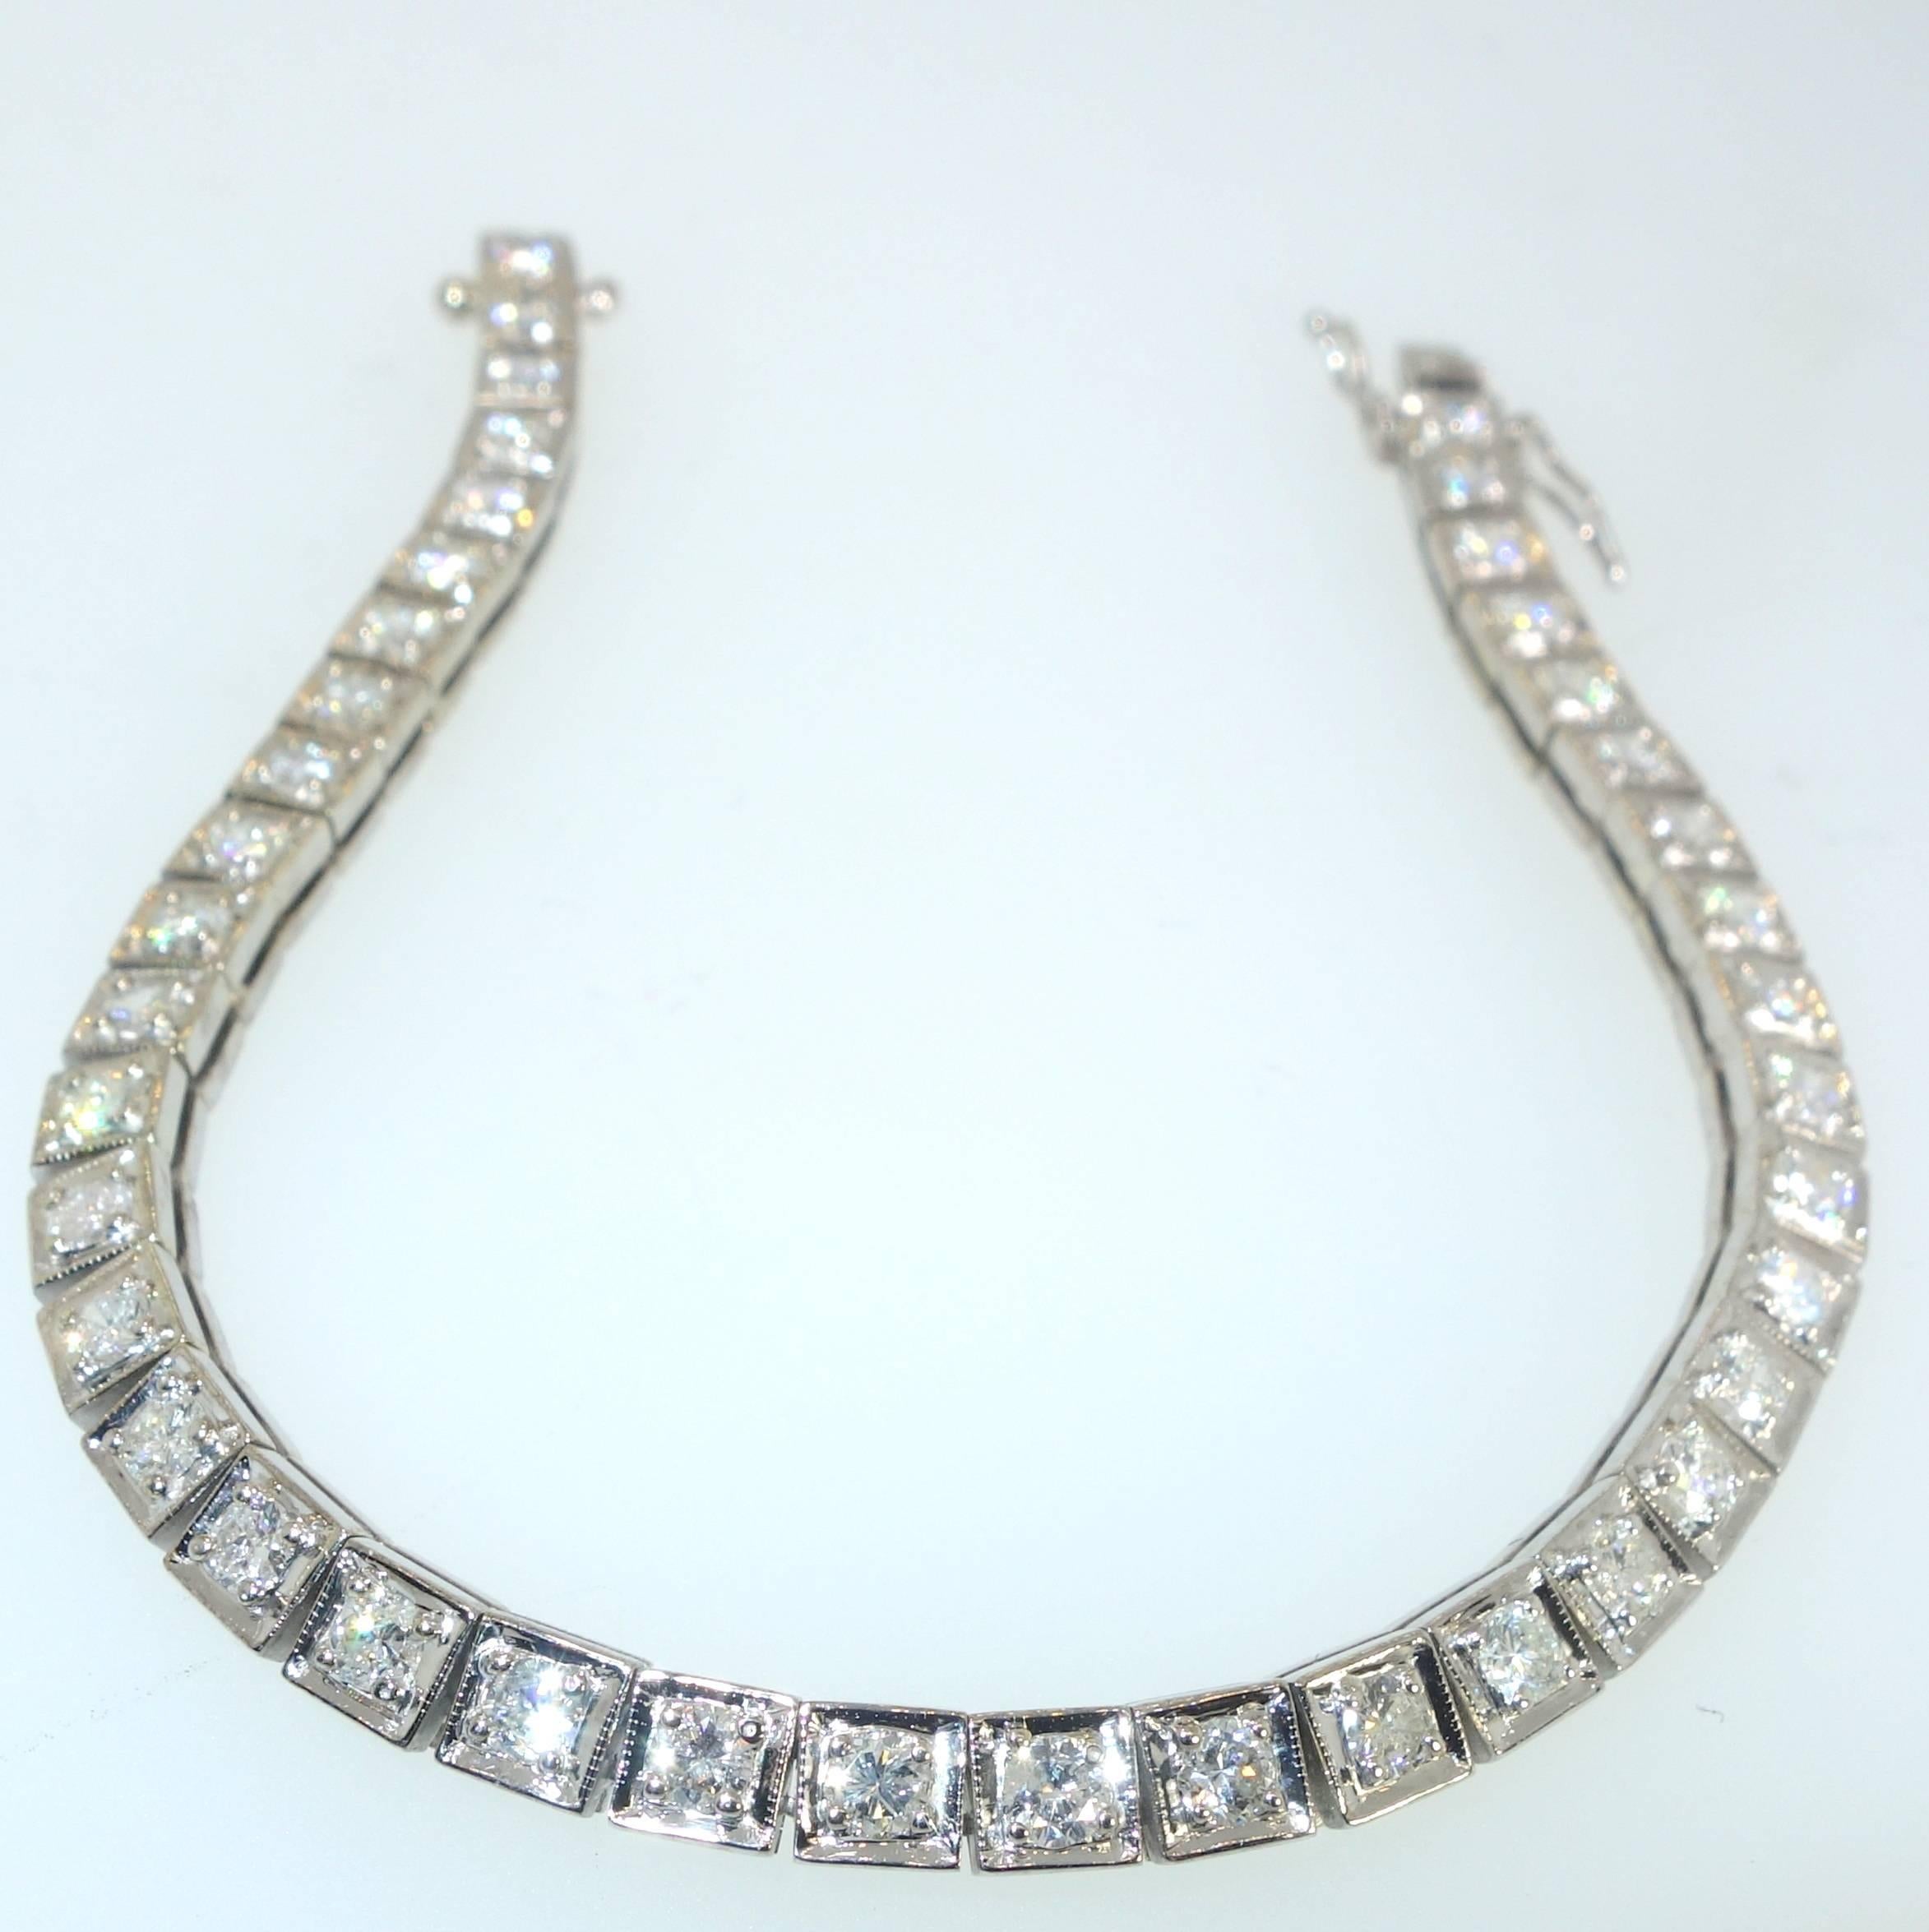 40 well matched round brilliant cut diamonds - all near colorless and slightly included are set in 18K white gold.  This 7 1/2 inch bracelet is in fine condition and was made in the mid 20th century (1950). 3.6 cts. of diamonds.